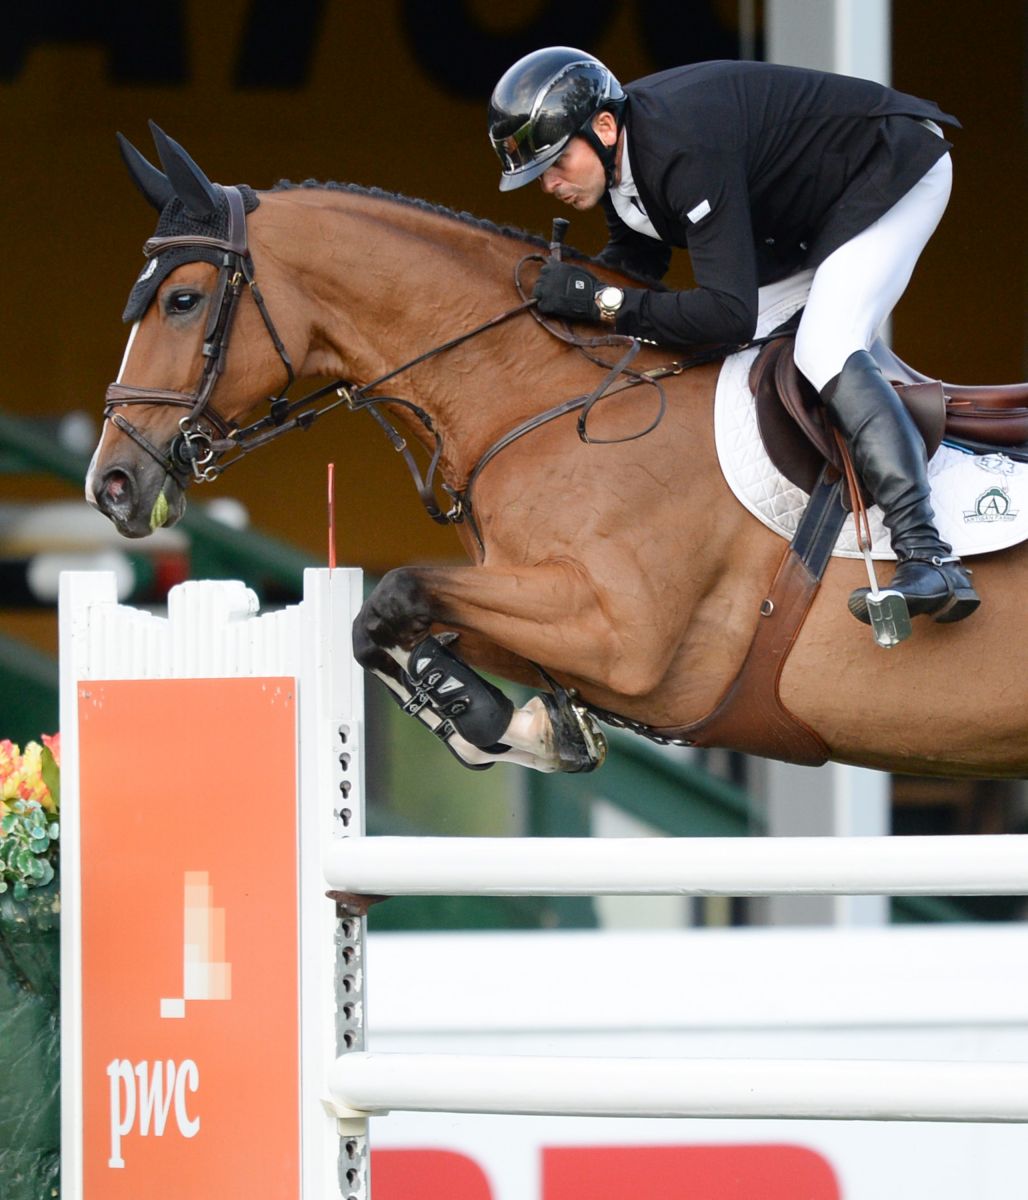 Lamaze Leads Two in a Row to Start ‘North American’ Tournament, Presented by Rolex, at Spruce Meadows